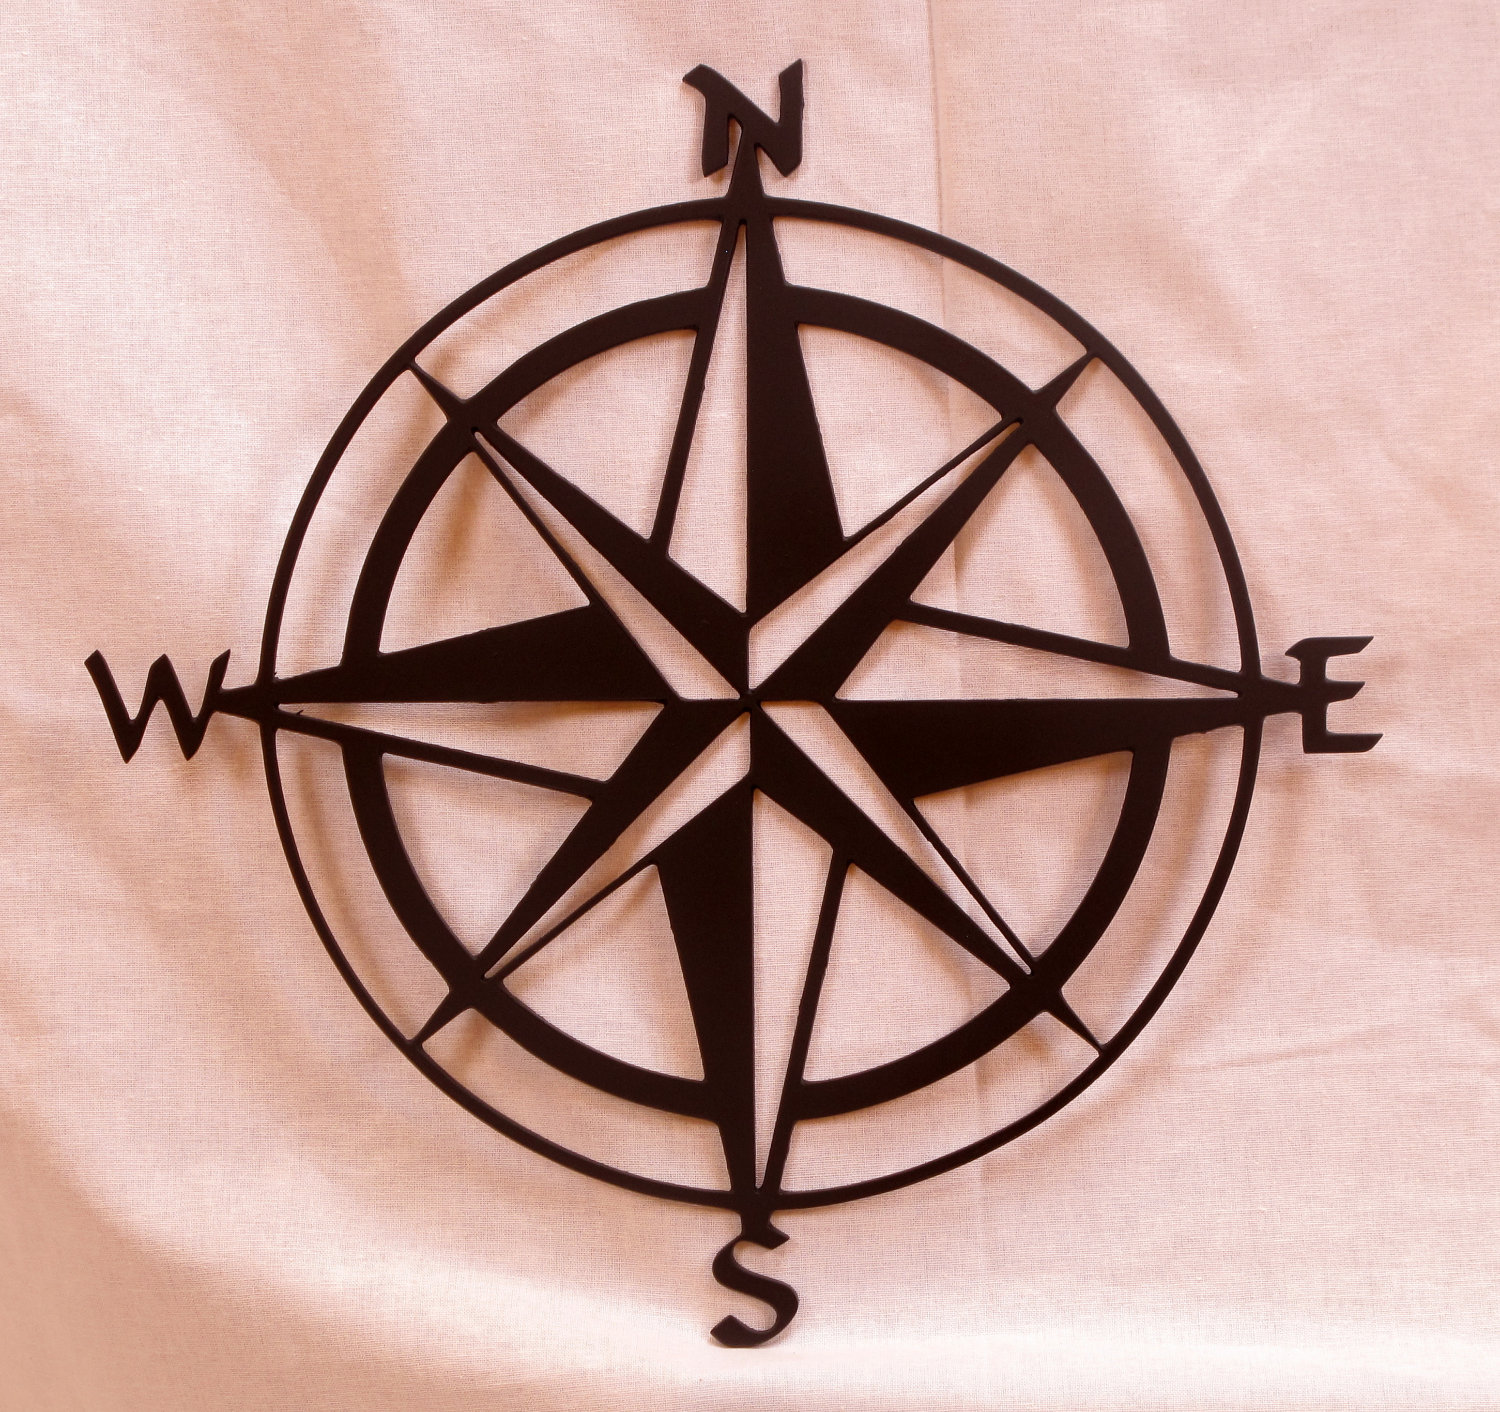 Popular items for compass rose on Etsy